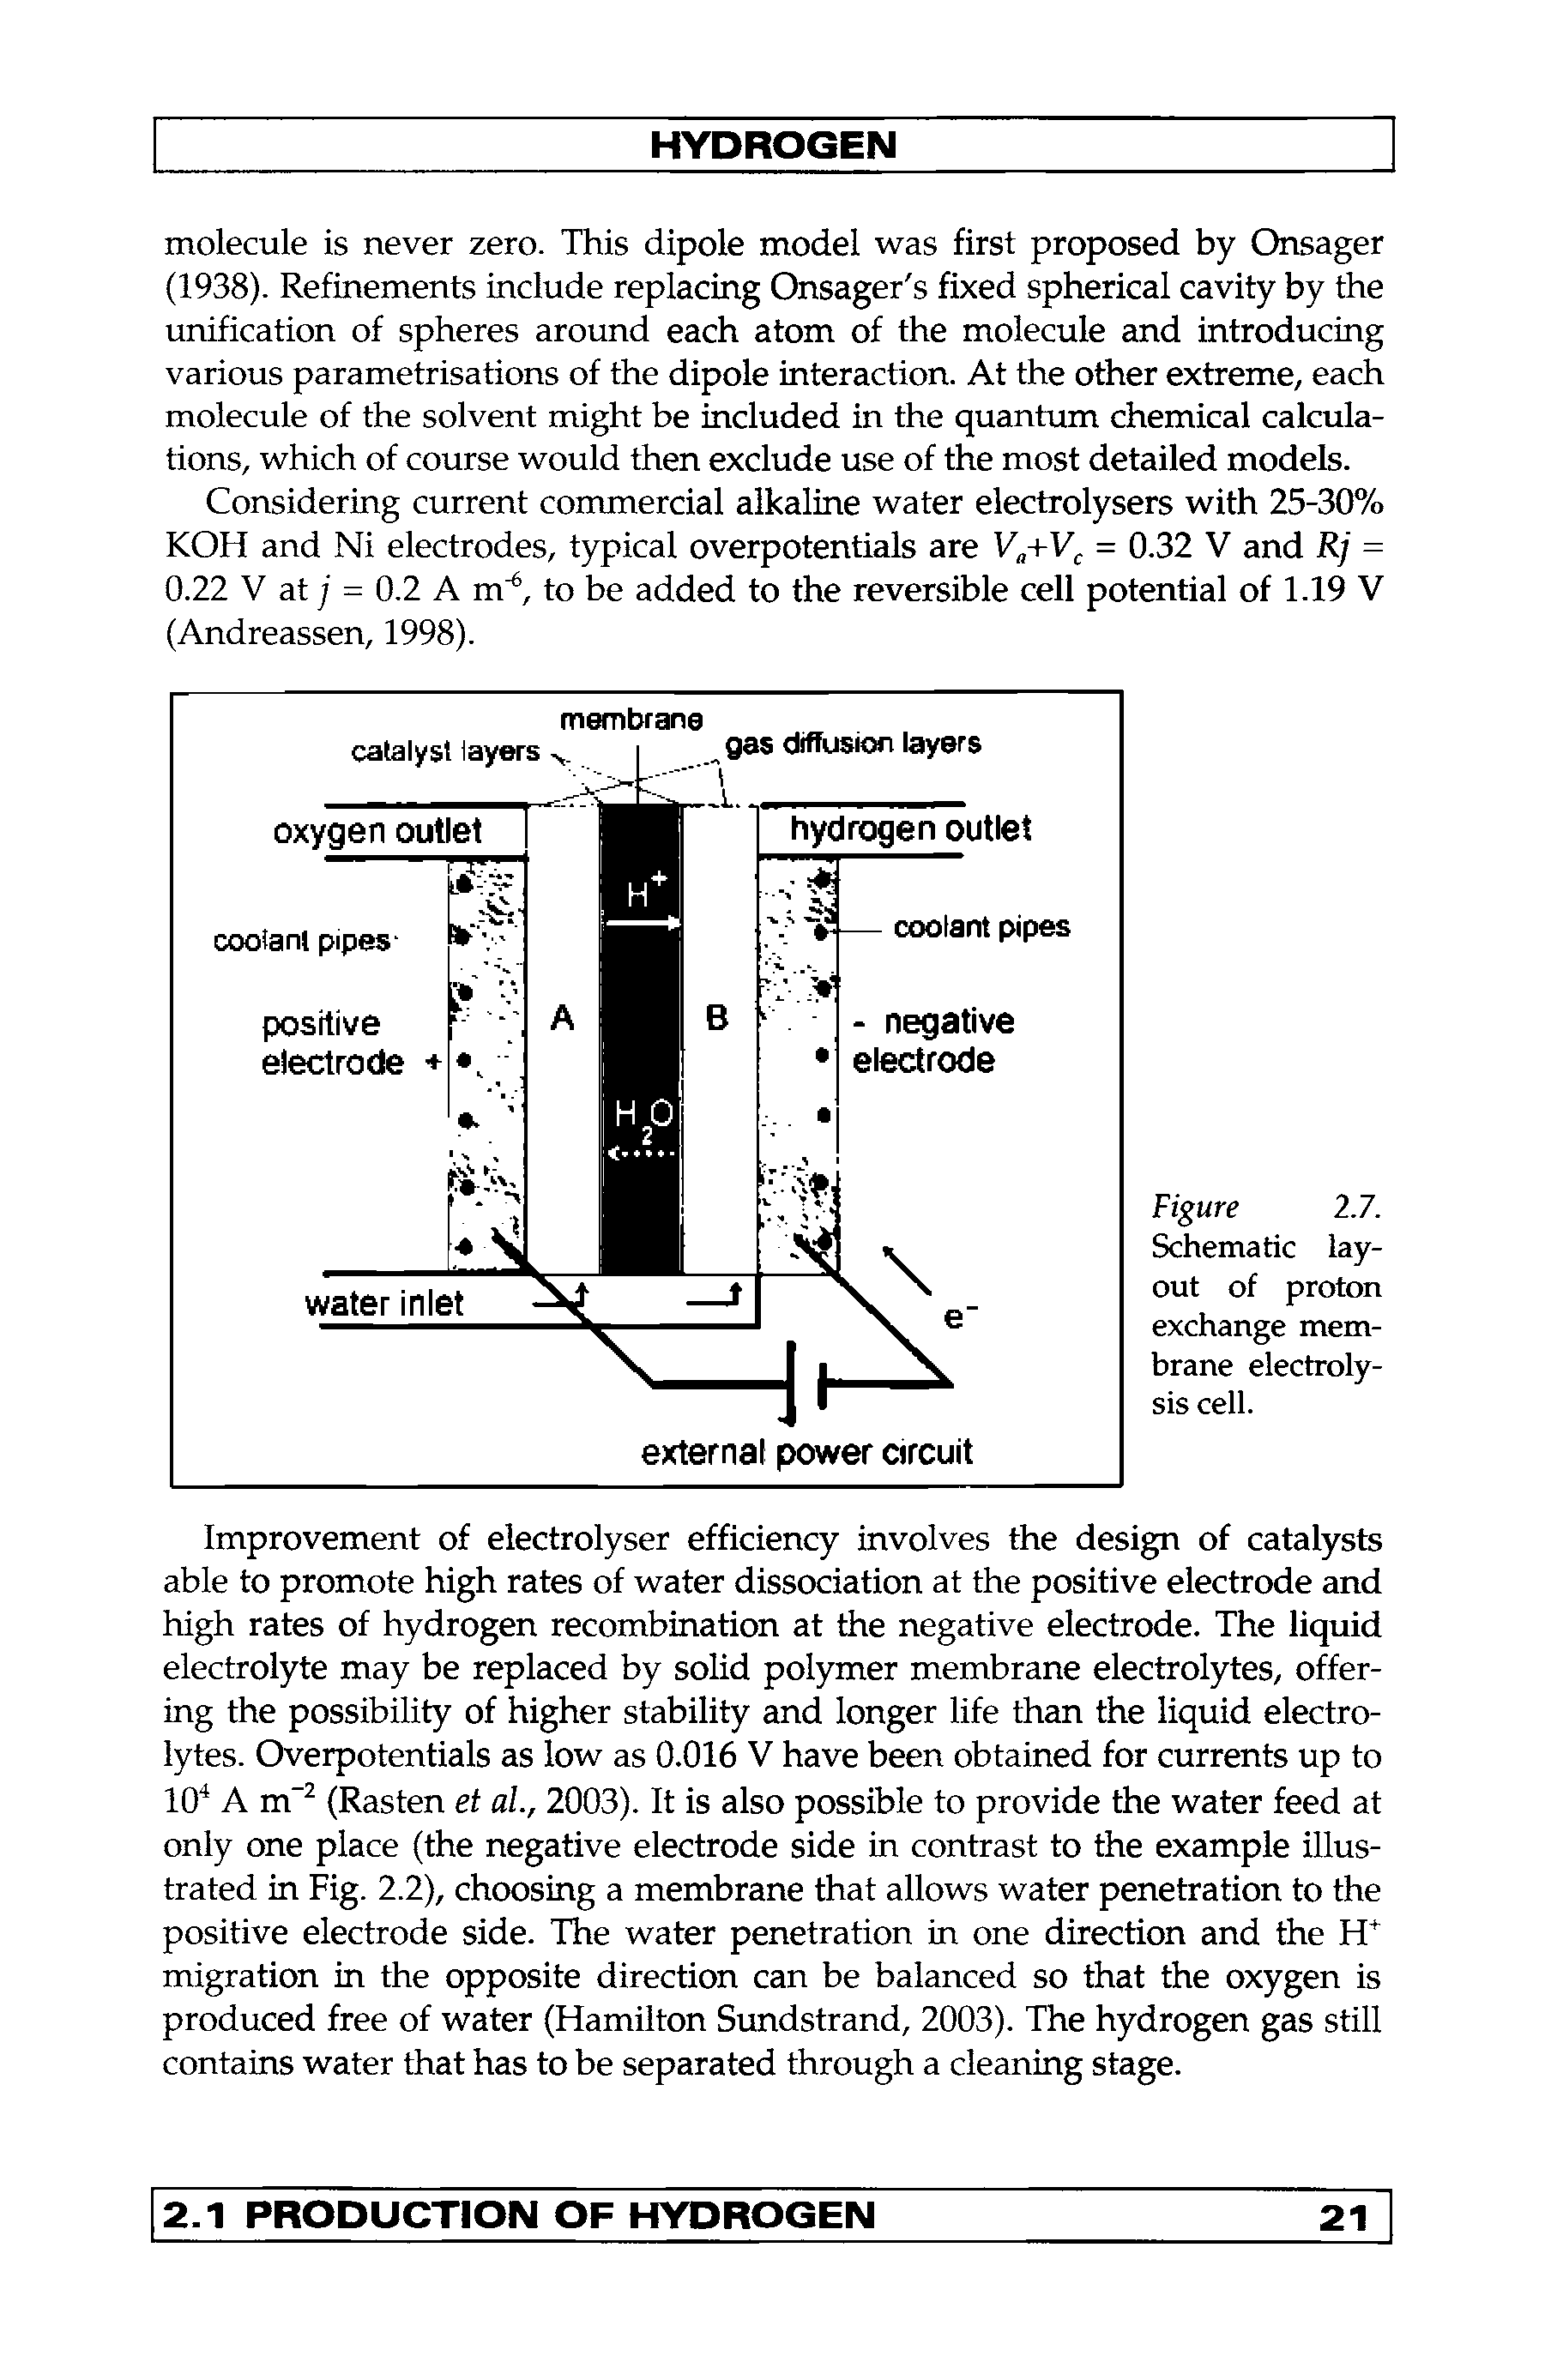 Figure 1.7. Schematic layout of proton exchange membrane electrolysis cell.